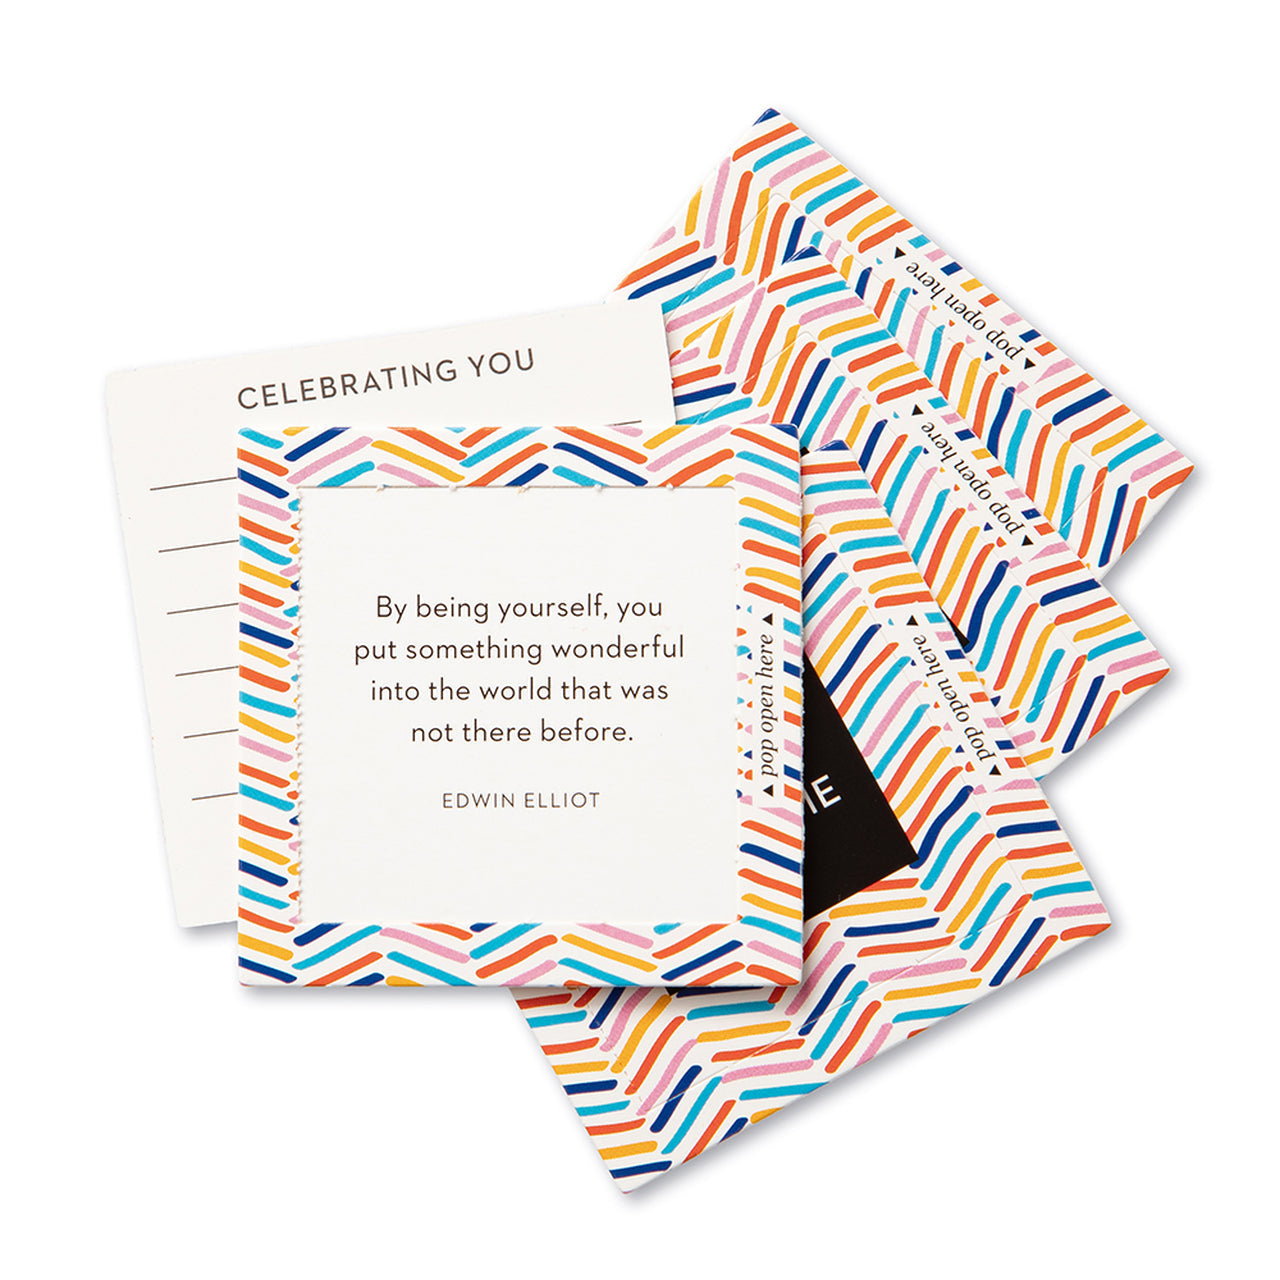 You're Awesome Thoughtfulls  Pop-Open Cards By LIVE-INSPIRED